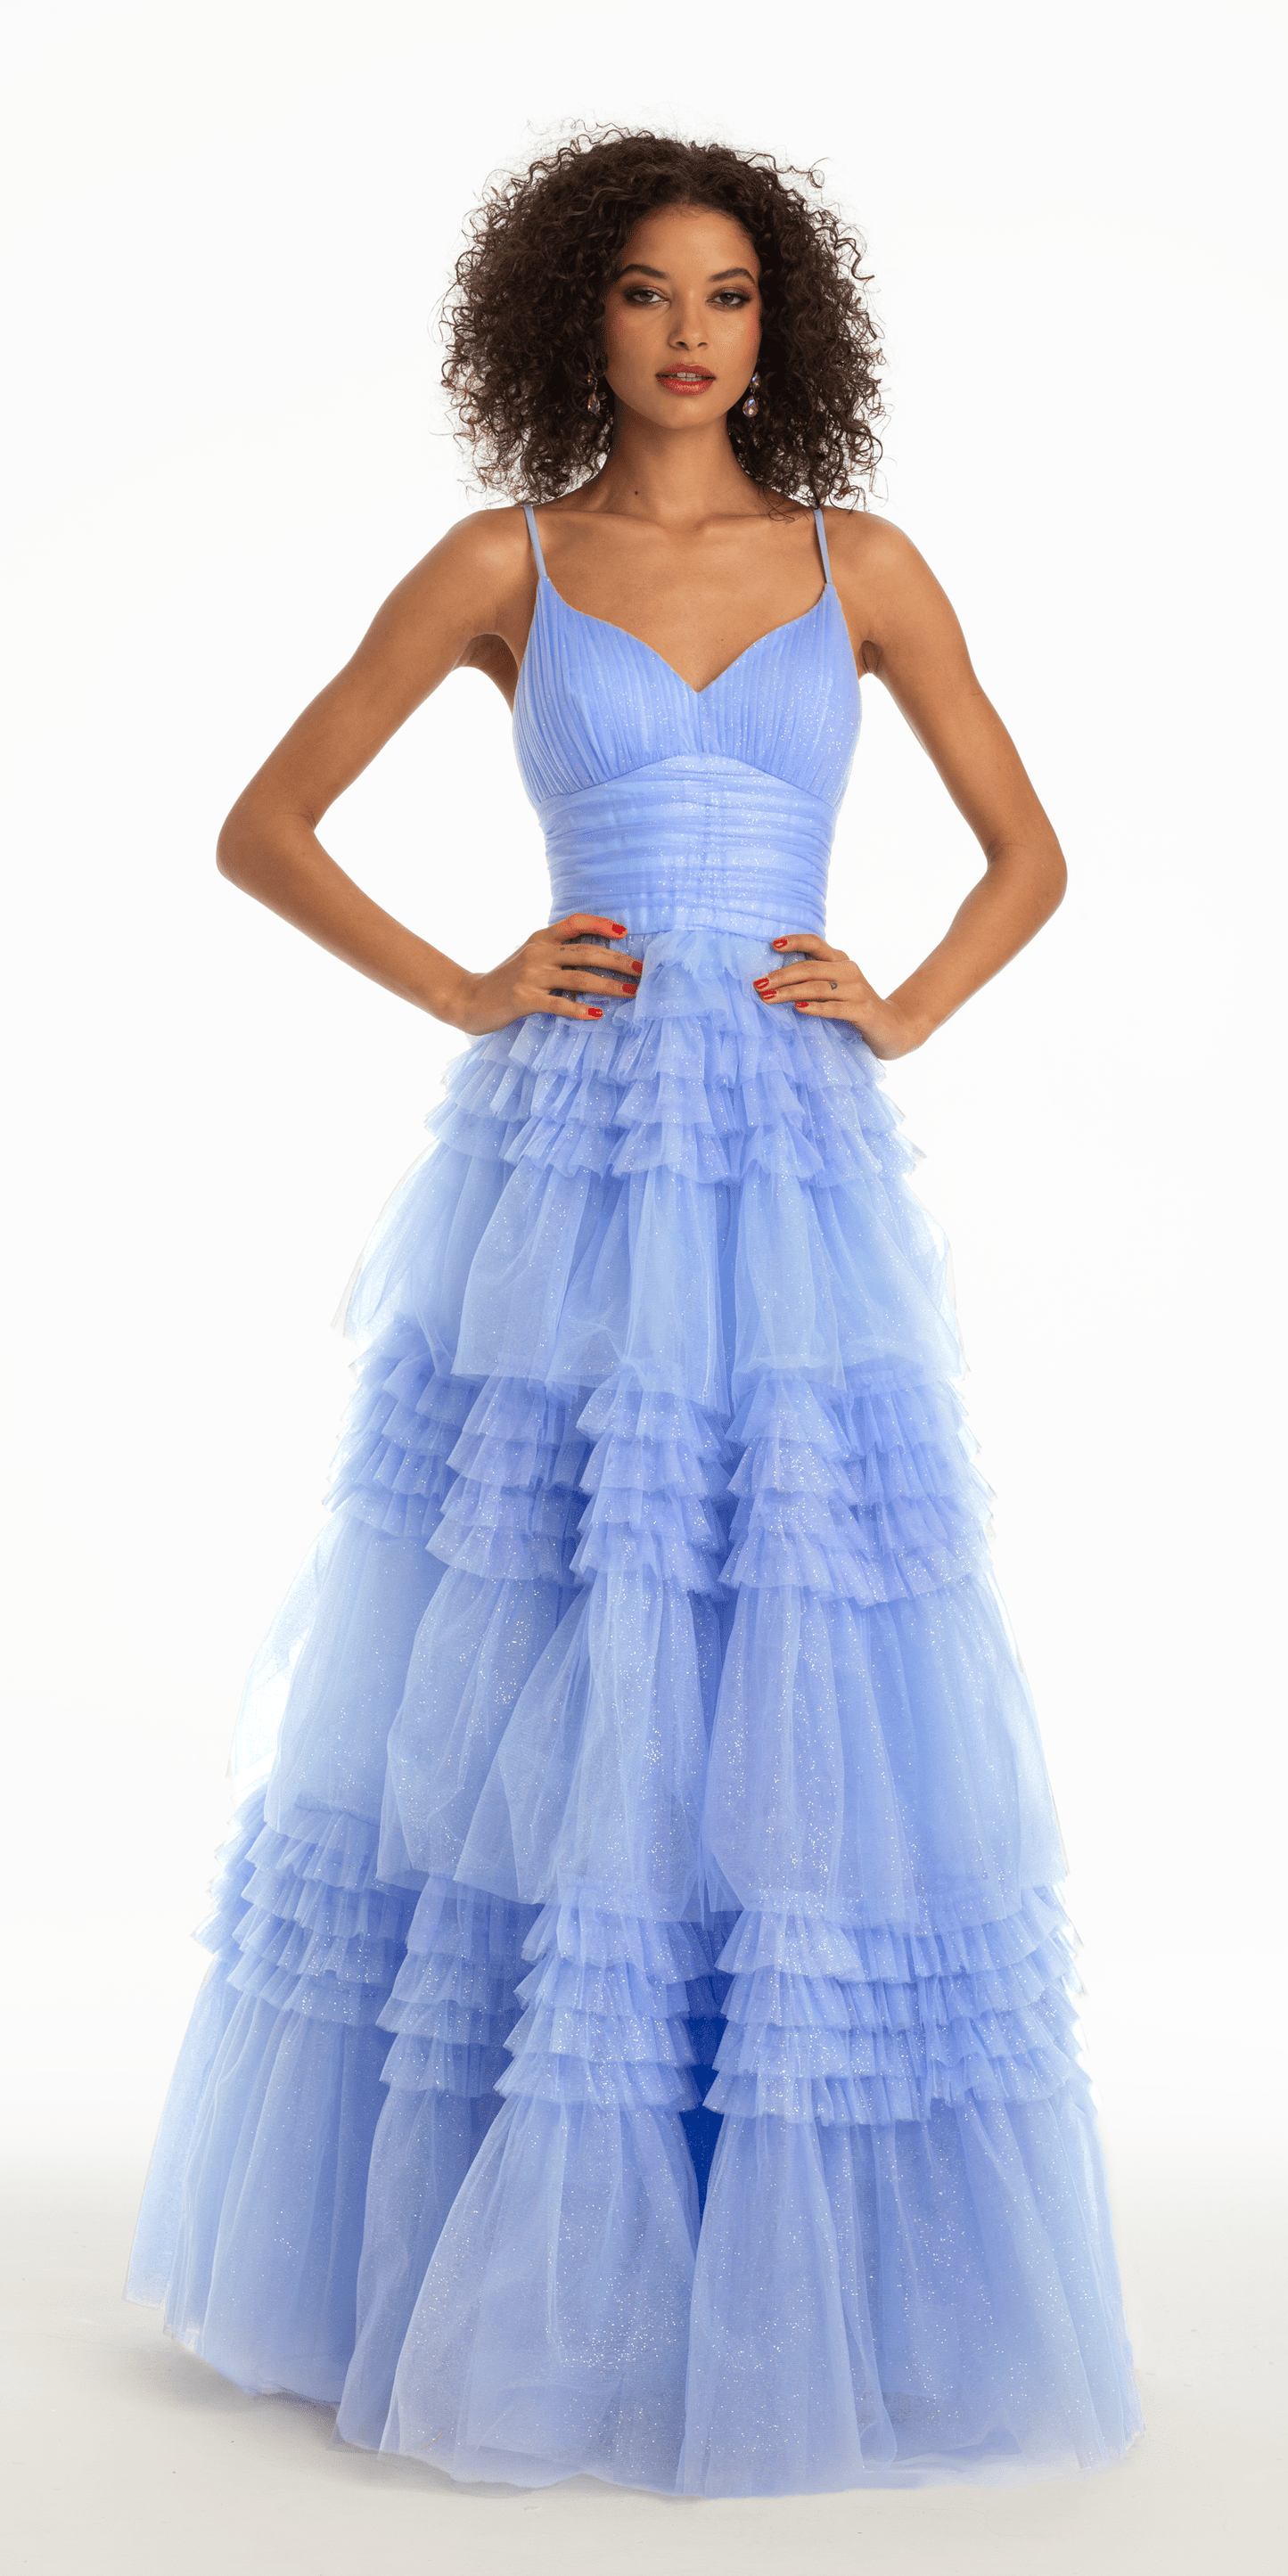 Camille La Vie Sweetheart Mesh Ruched Tiered Lace Up Back Ballgown missy / 00 / periwinkle